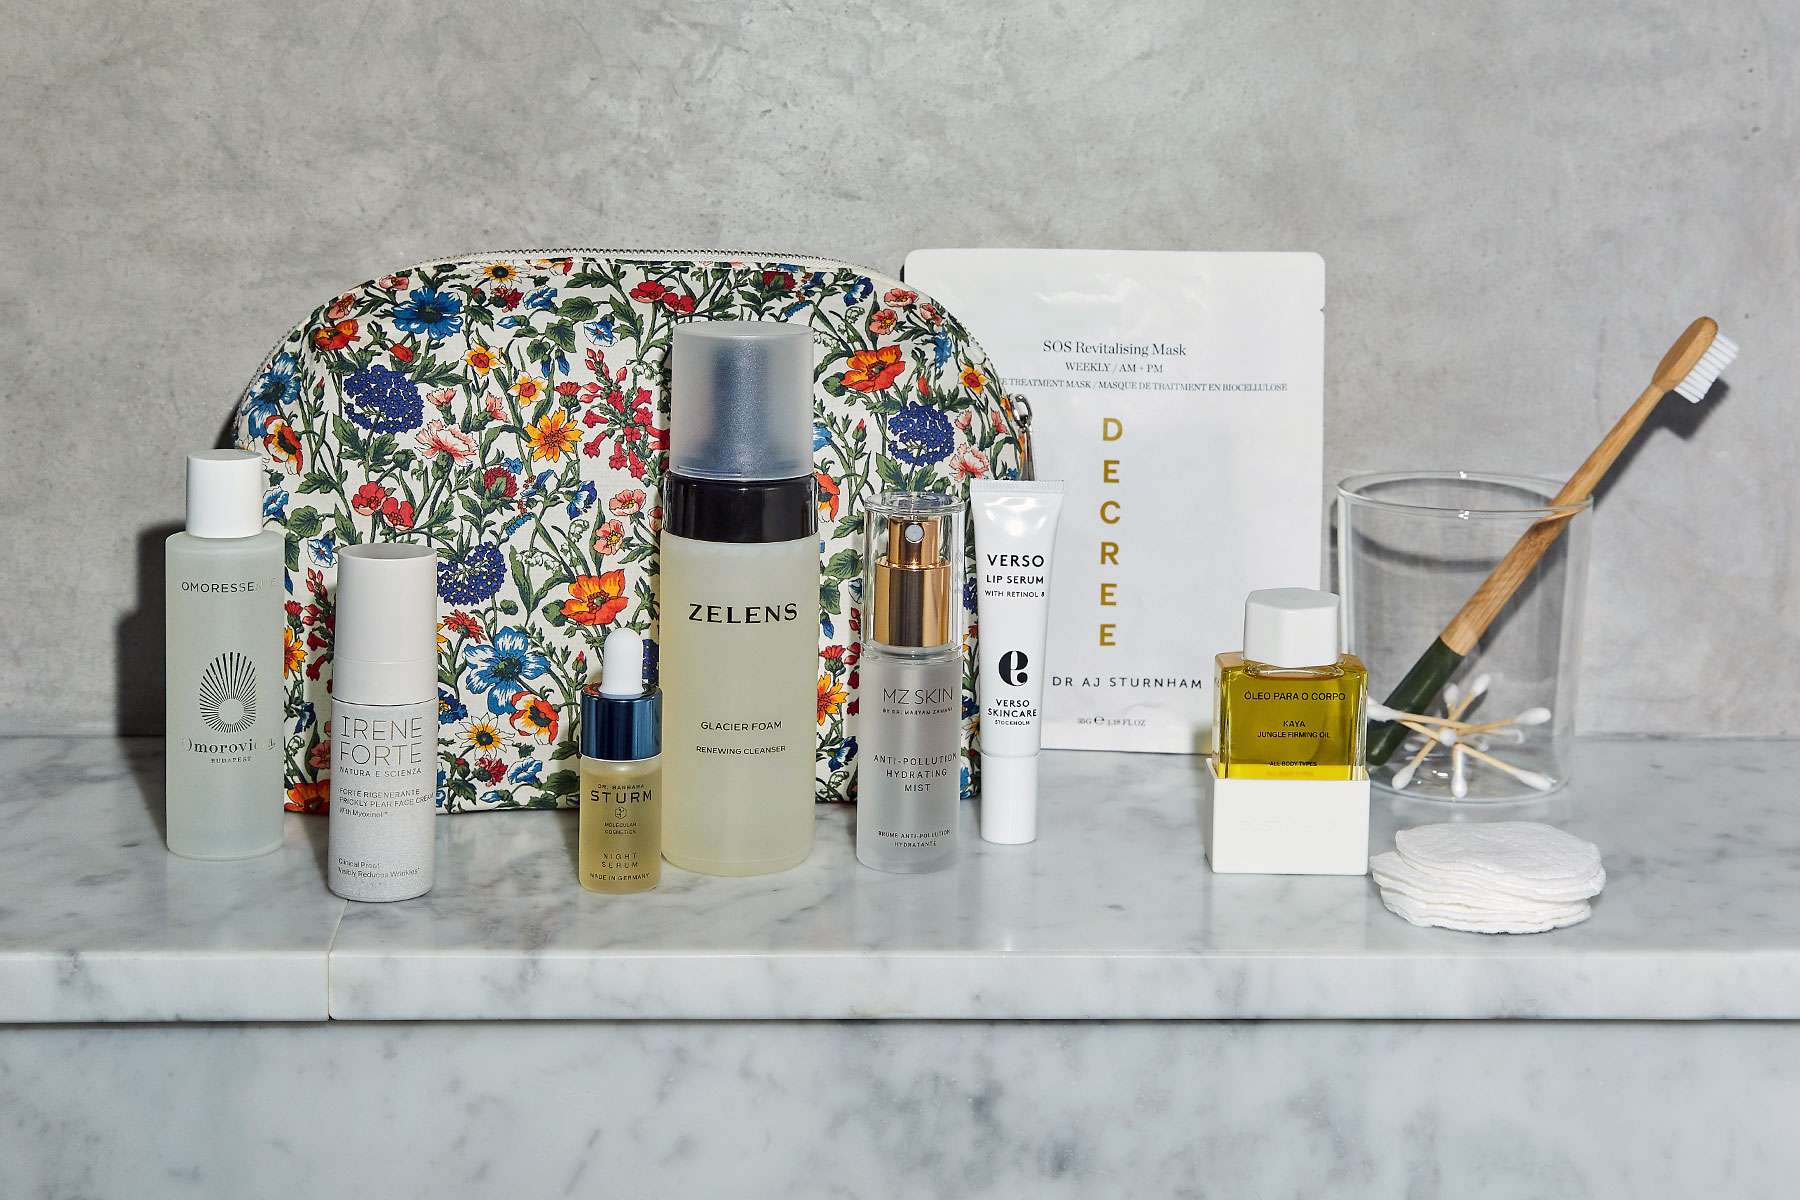 How to Curate the Perfect Bathroom Shelf